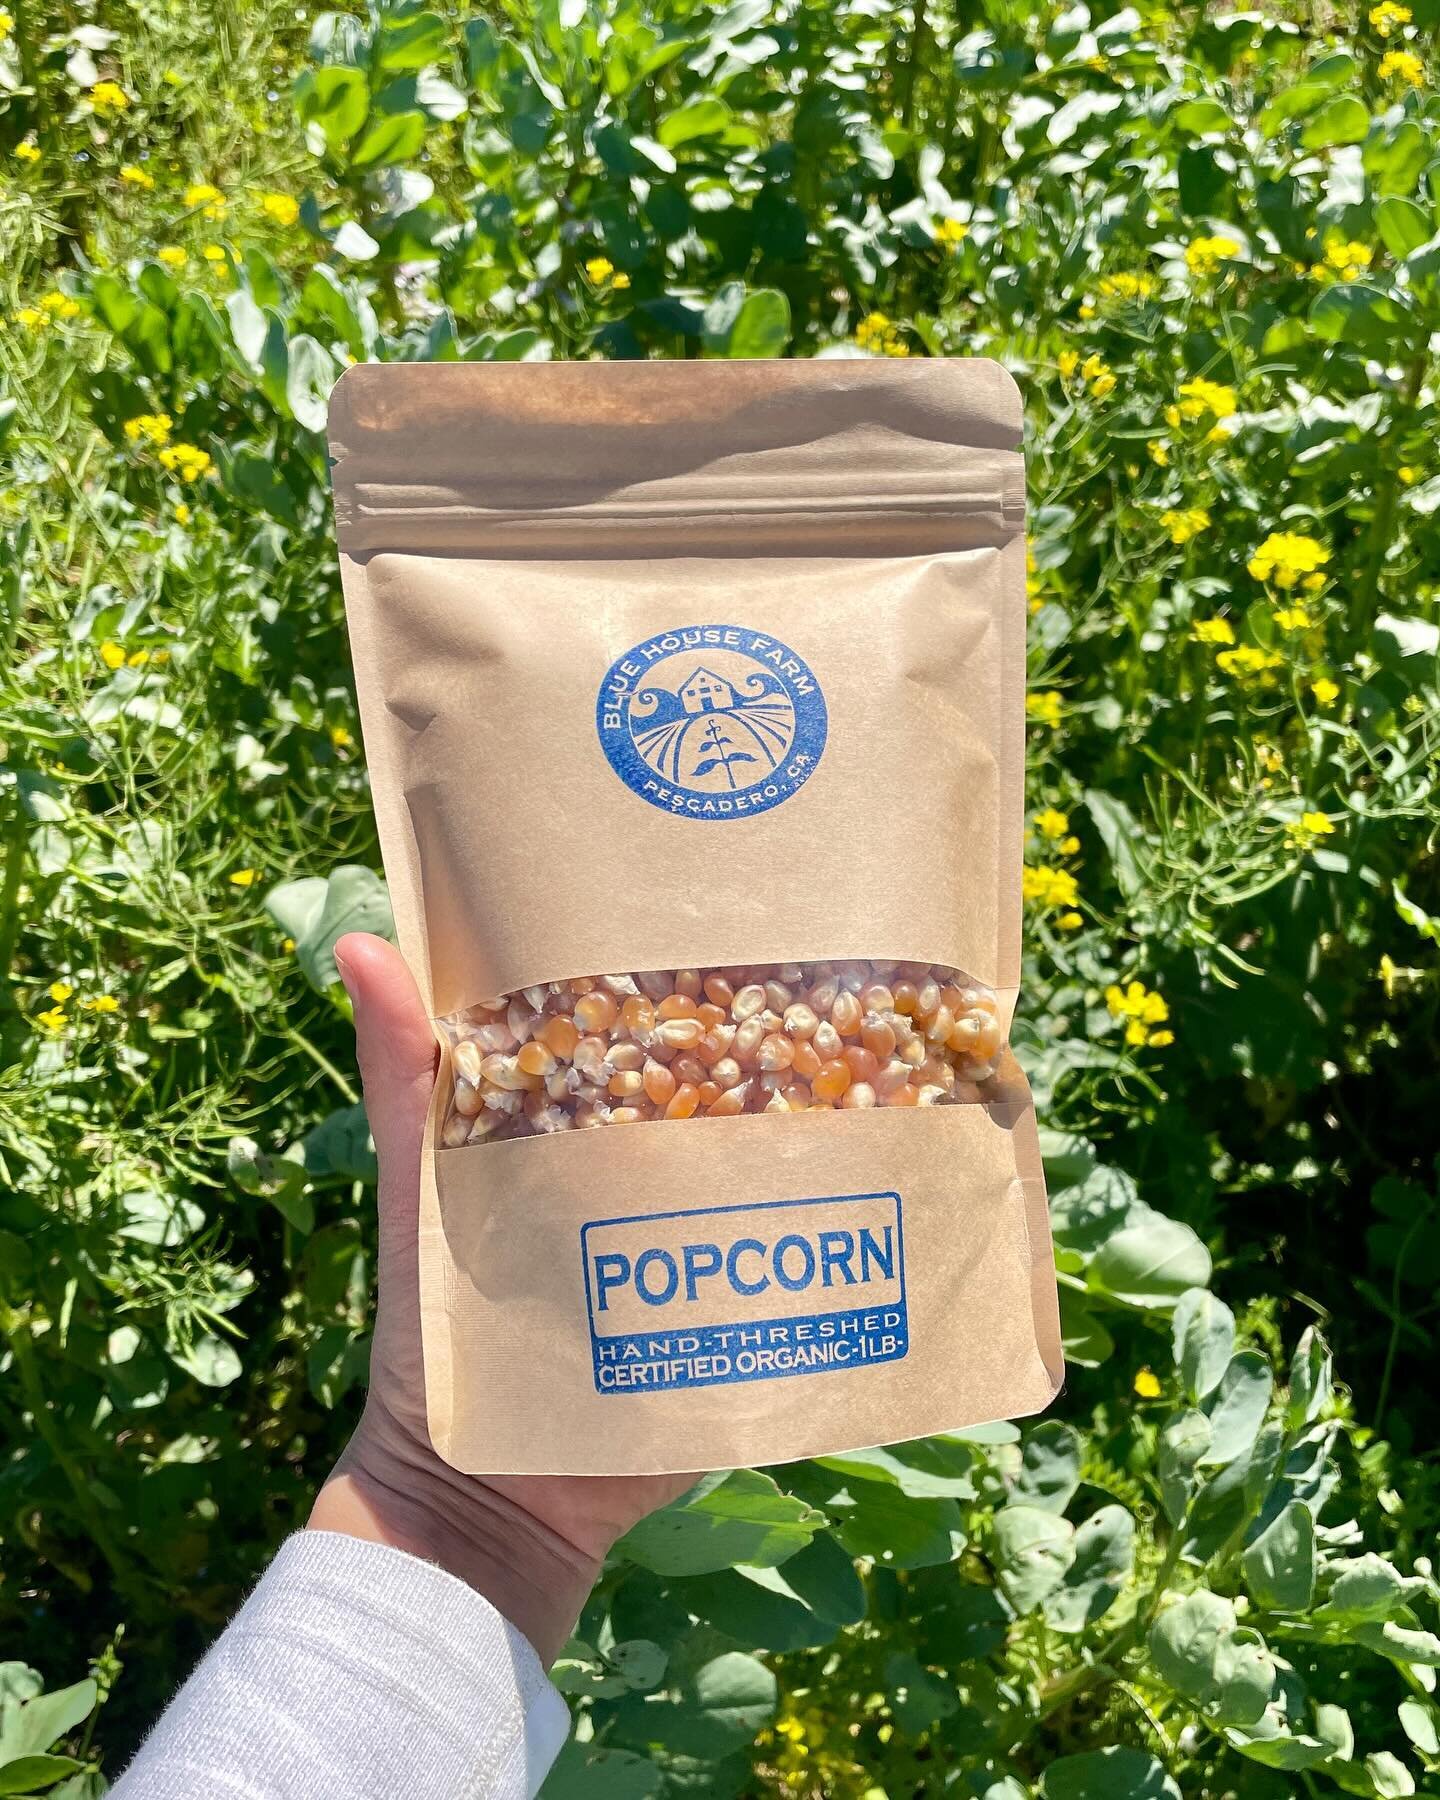 Better late than never&hellip; our popcorn is bagged and ready for market! Catch us this weekend:

SATURDAY
College of San Mateo 9 &mdash; 1
Westside Santa Cruz 9 &mdash; 1
Grand Lake Oakland 9 &mdash; 2
Farmstand 11 &mdash; 4

SUNDAY
Stonestown SF 9